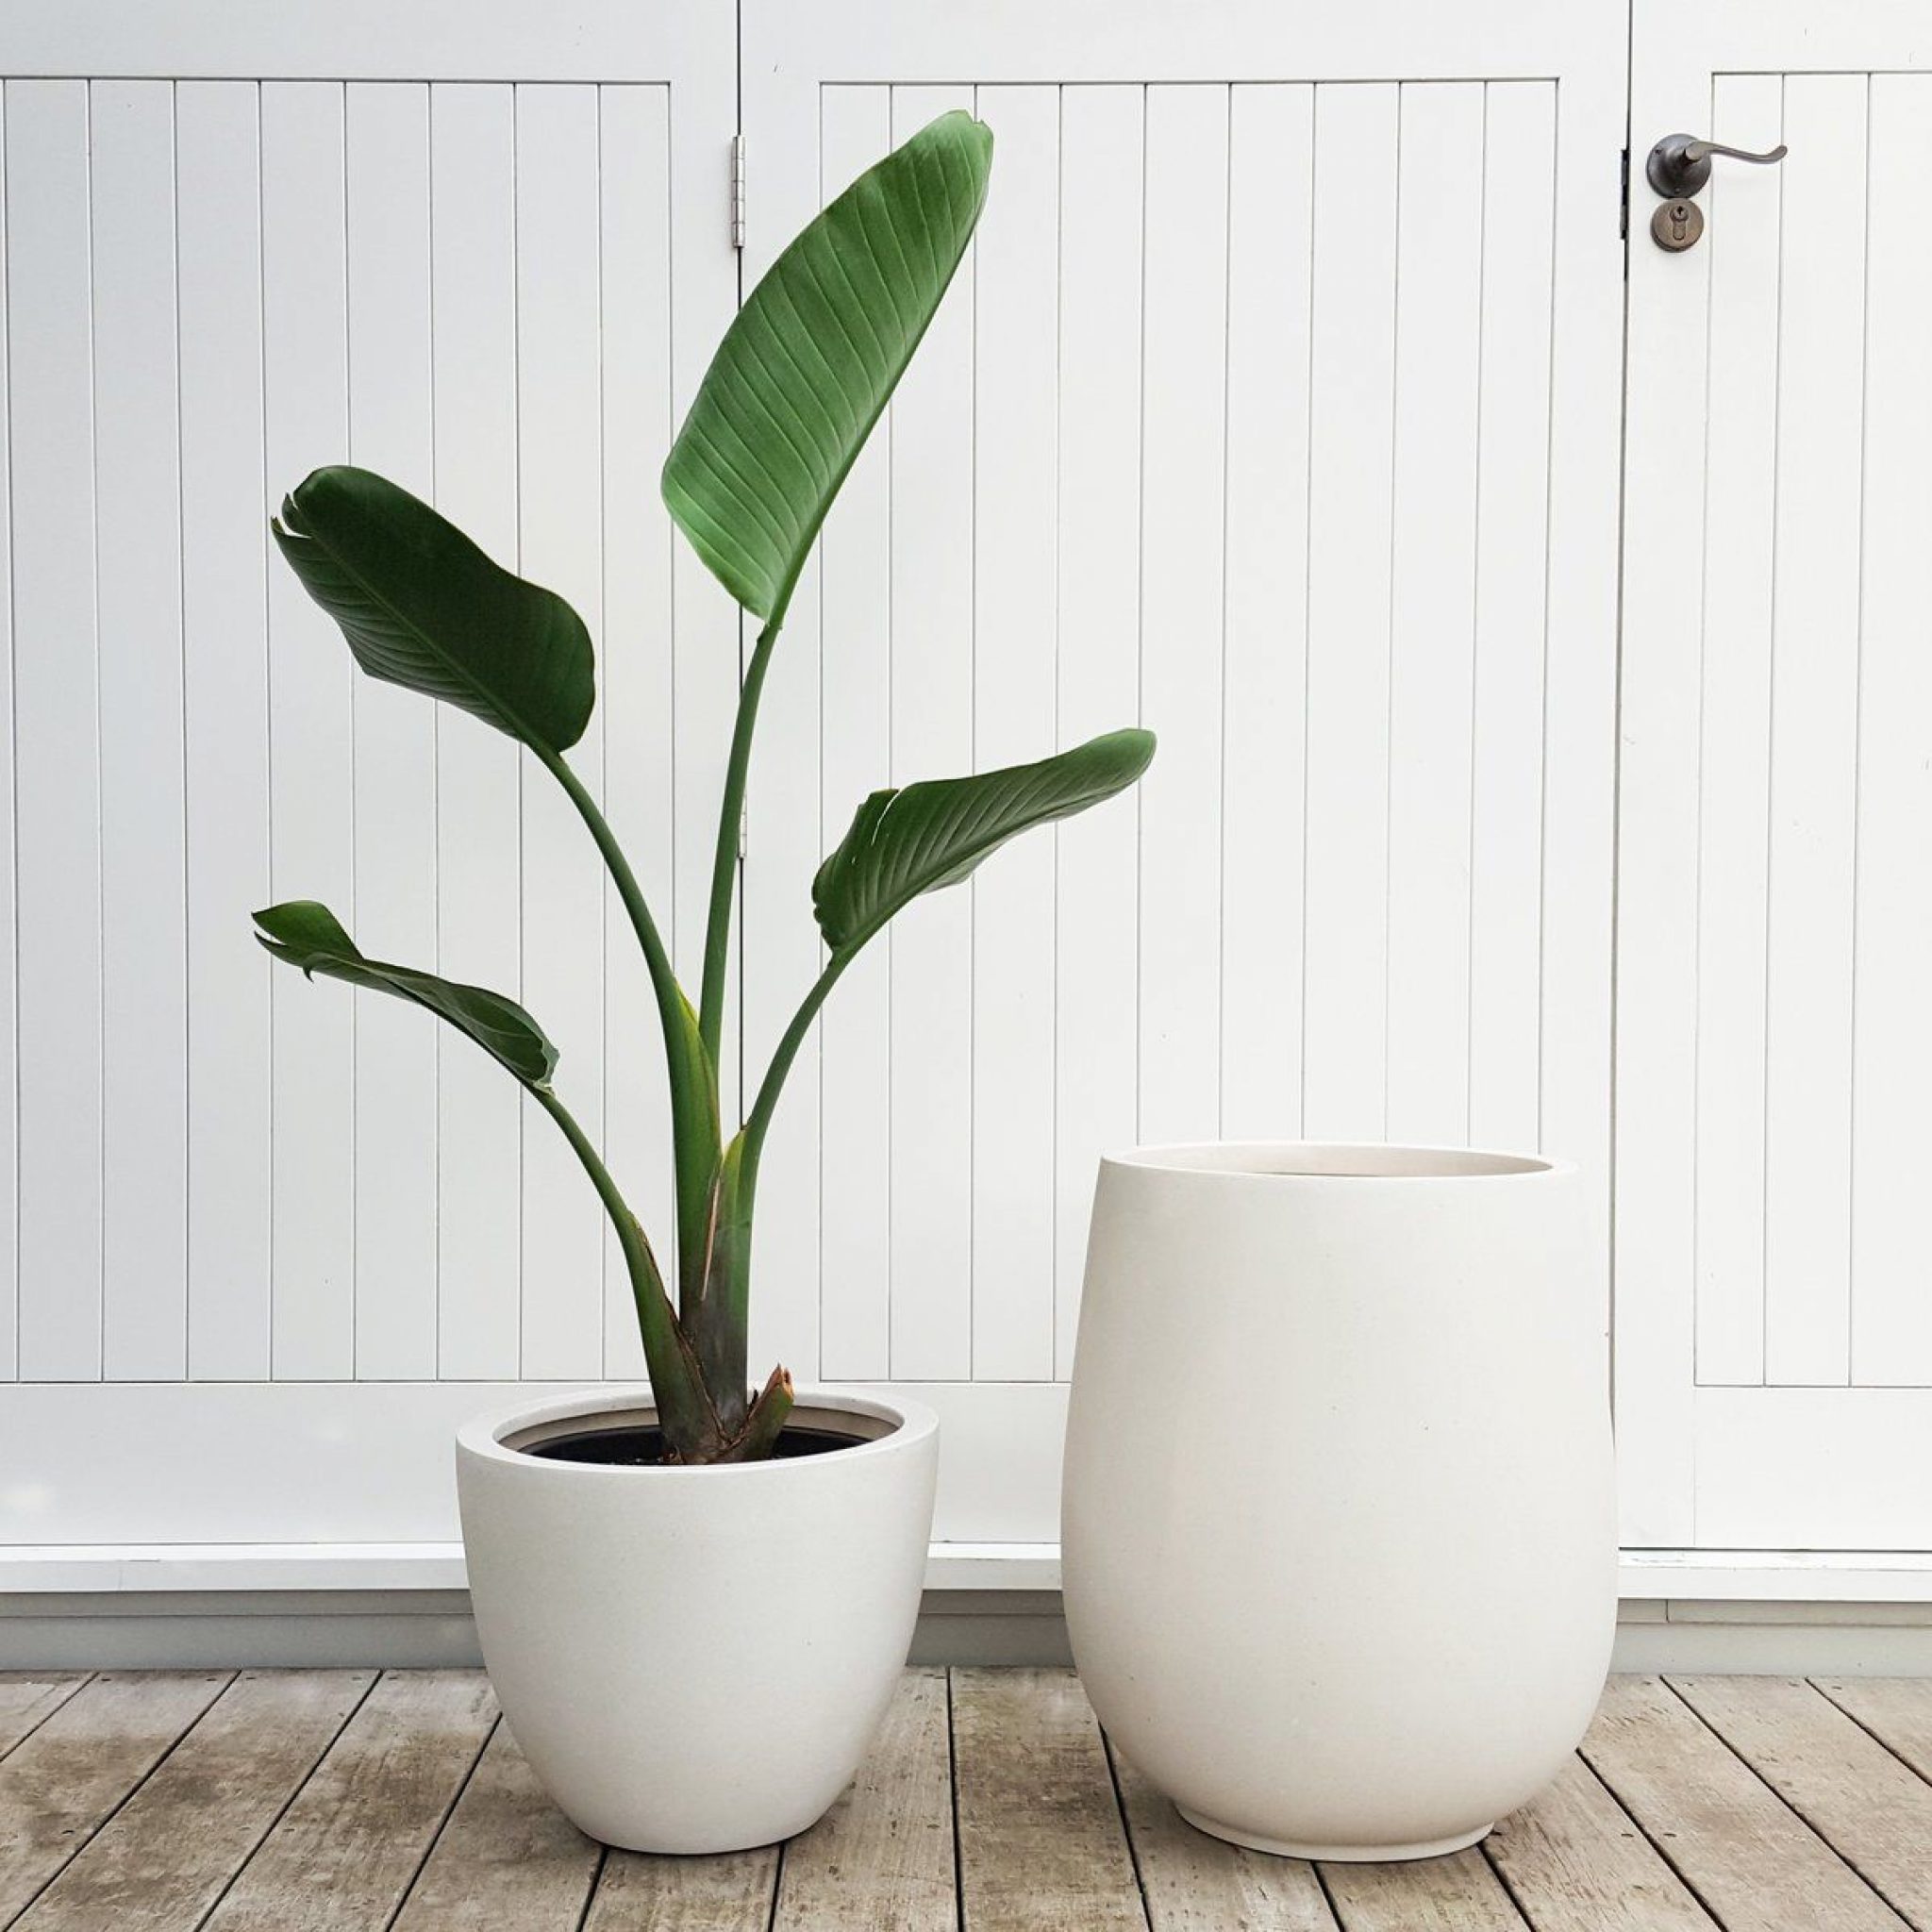 Arch2O 7 Marvelous Houseplant Trends For 2023 You Shouldnt Be Missing 6 2048x2048 